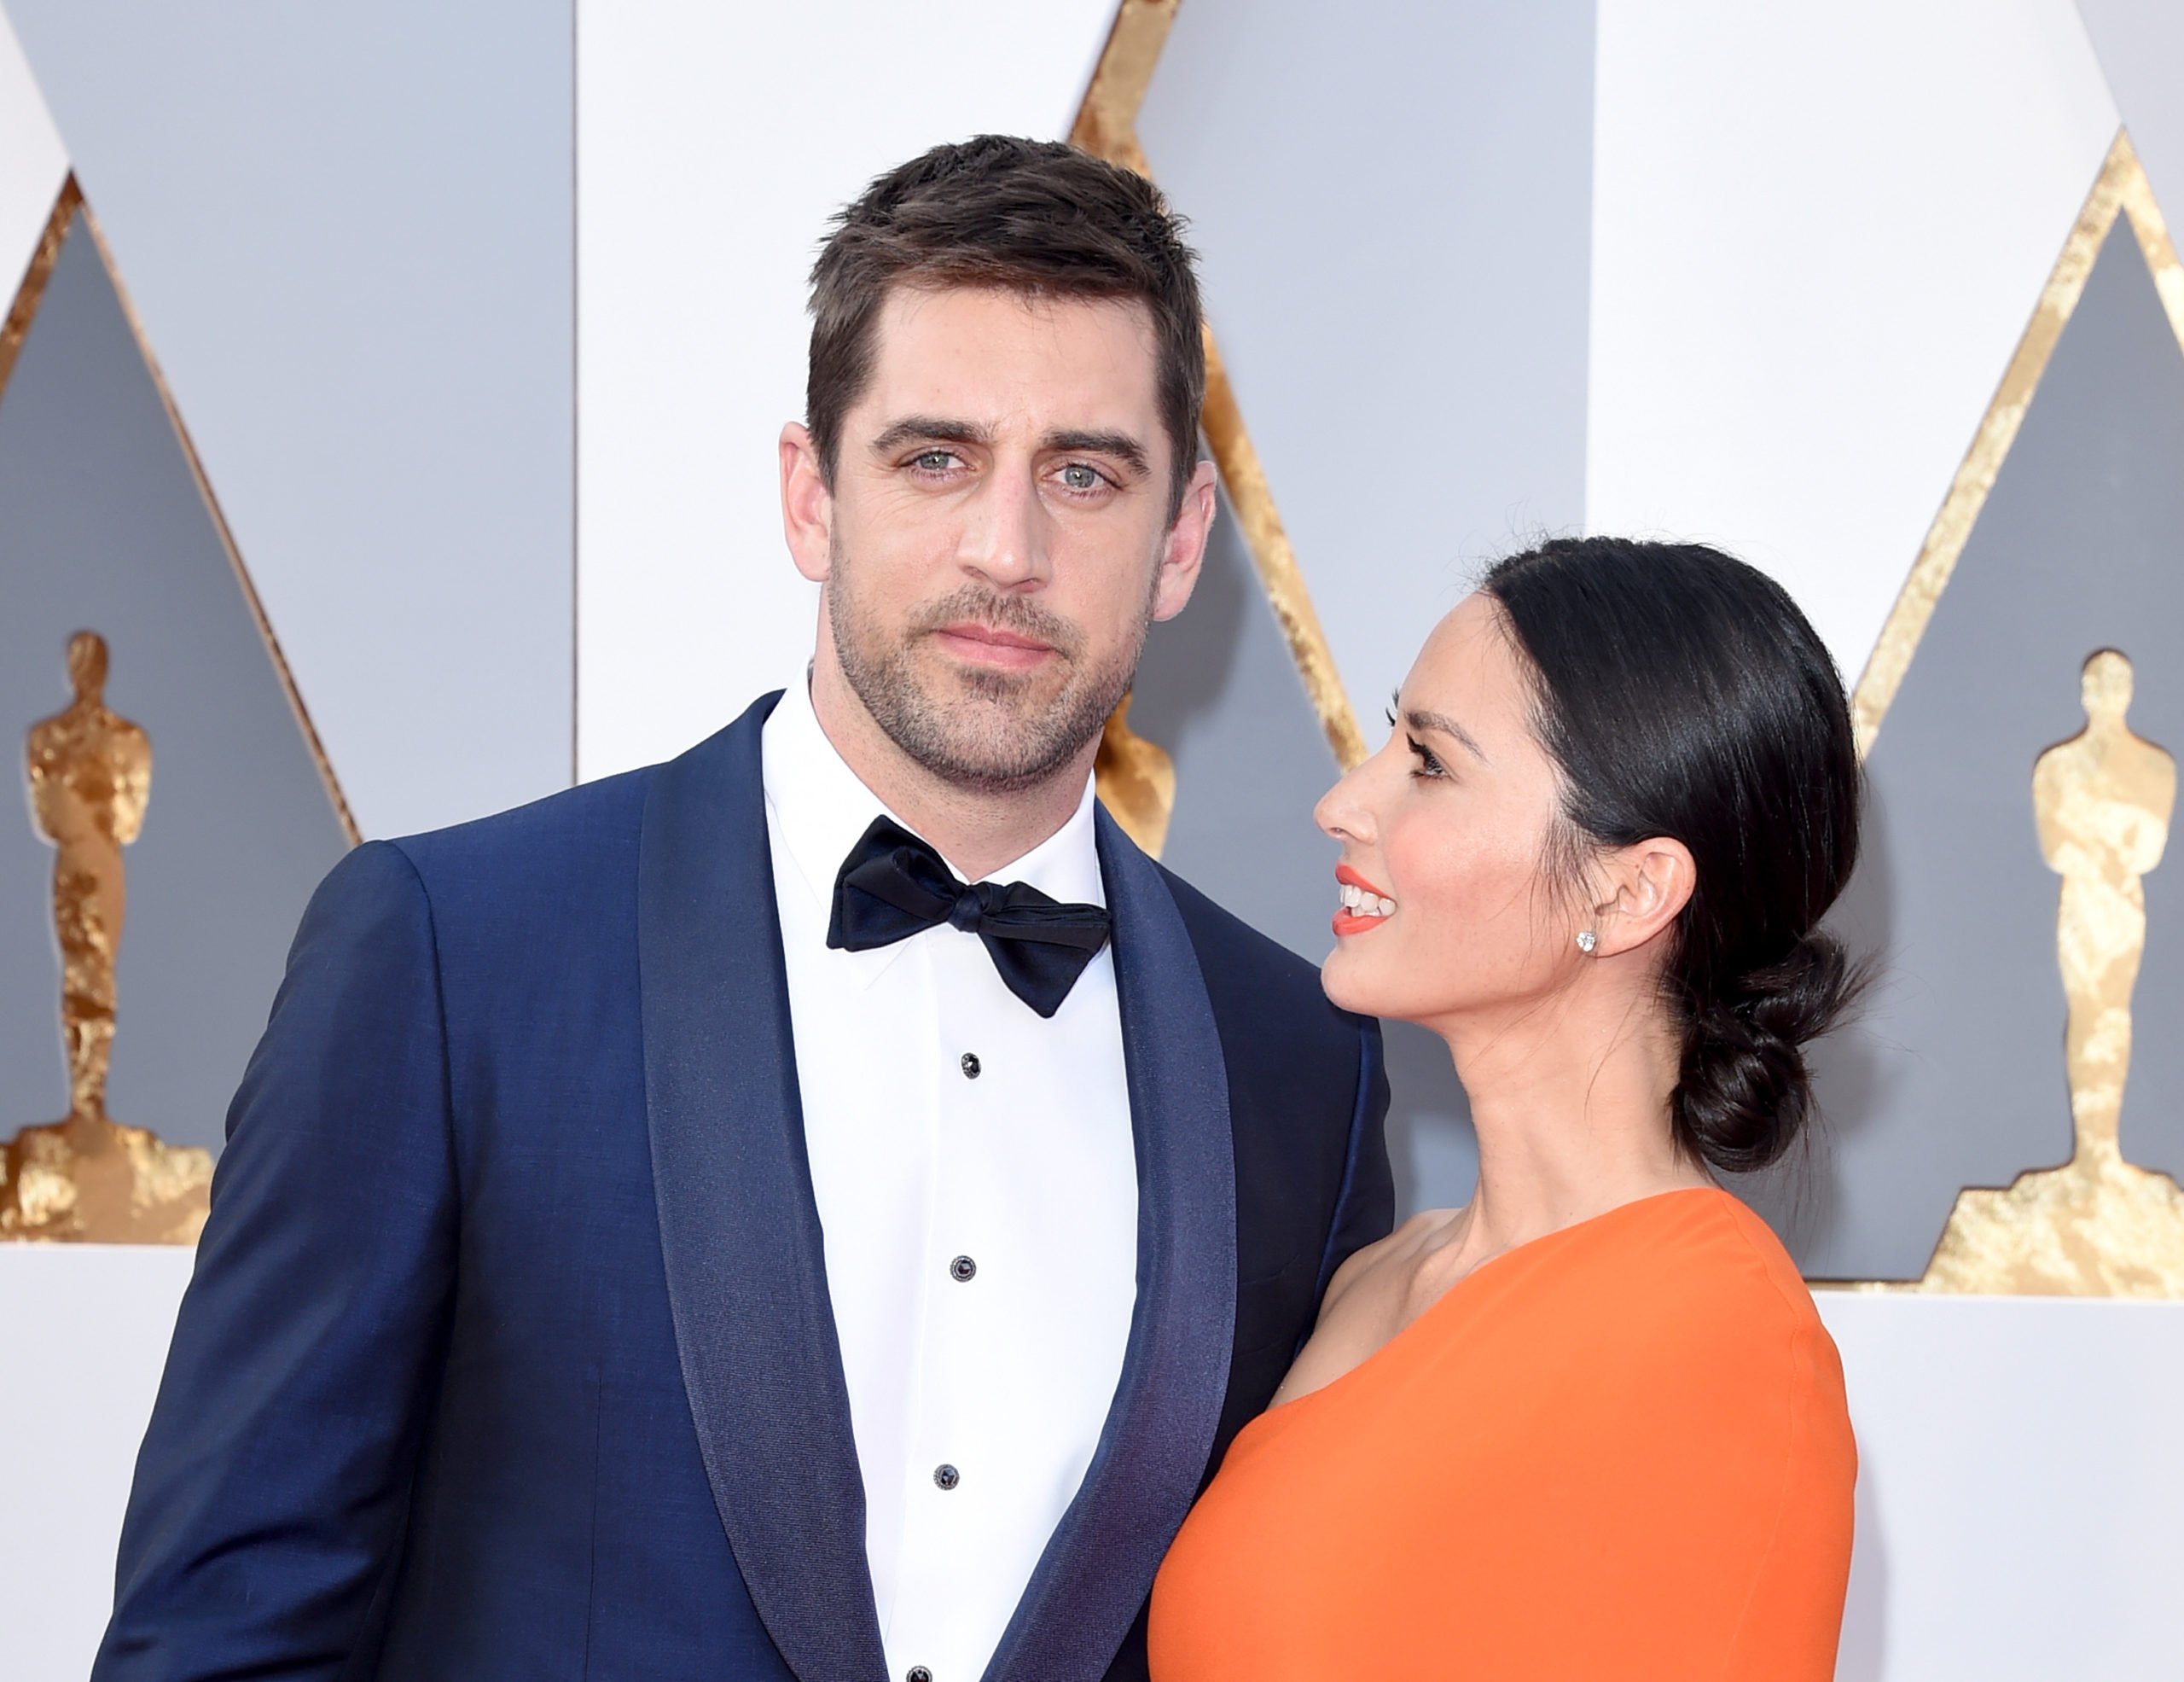 HOLLYWOOD, CA - FEBRUARY 28: NFL player Aaron Rodgers (L) and actress Olivia Munn attend the 88th Annual Academy Awards at Hollywood & Highland Center on February 28, 2016 in Hollywood, California. Jason Merritt/Getty Images